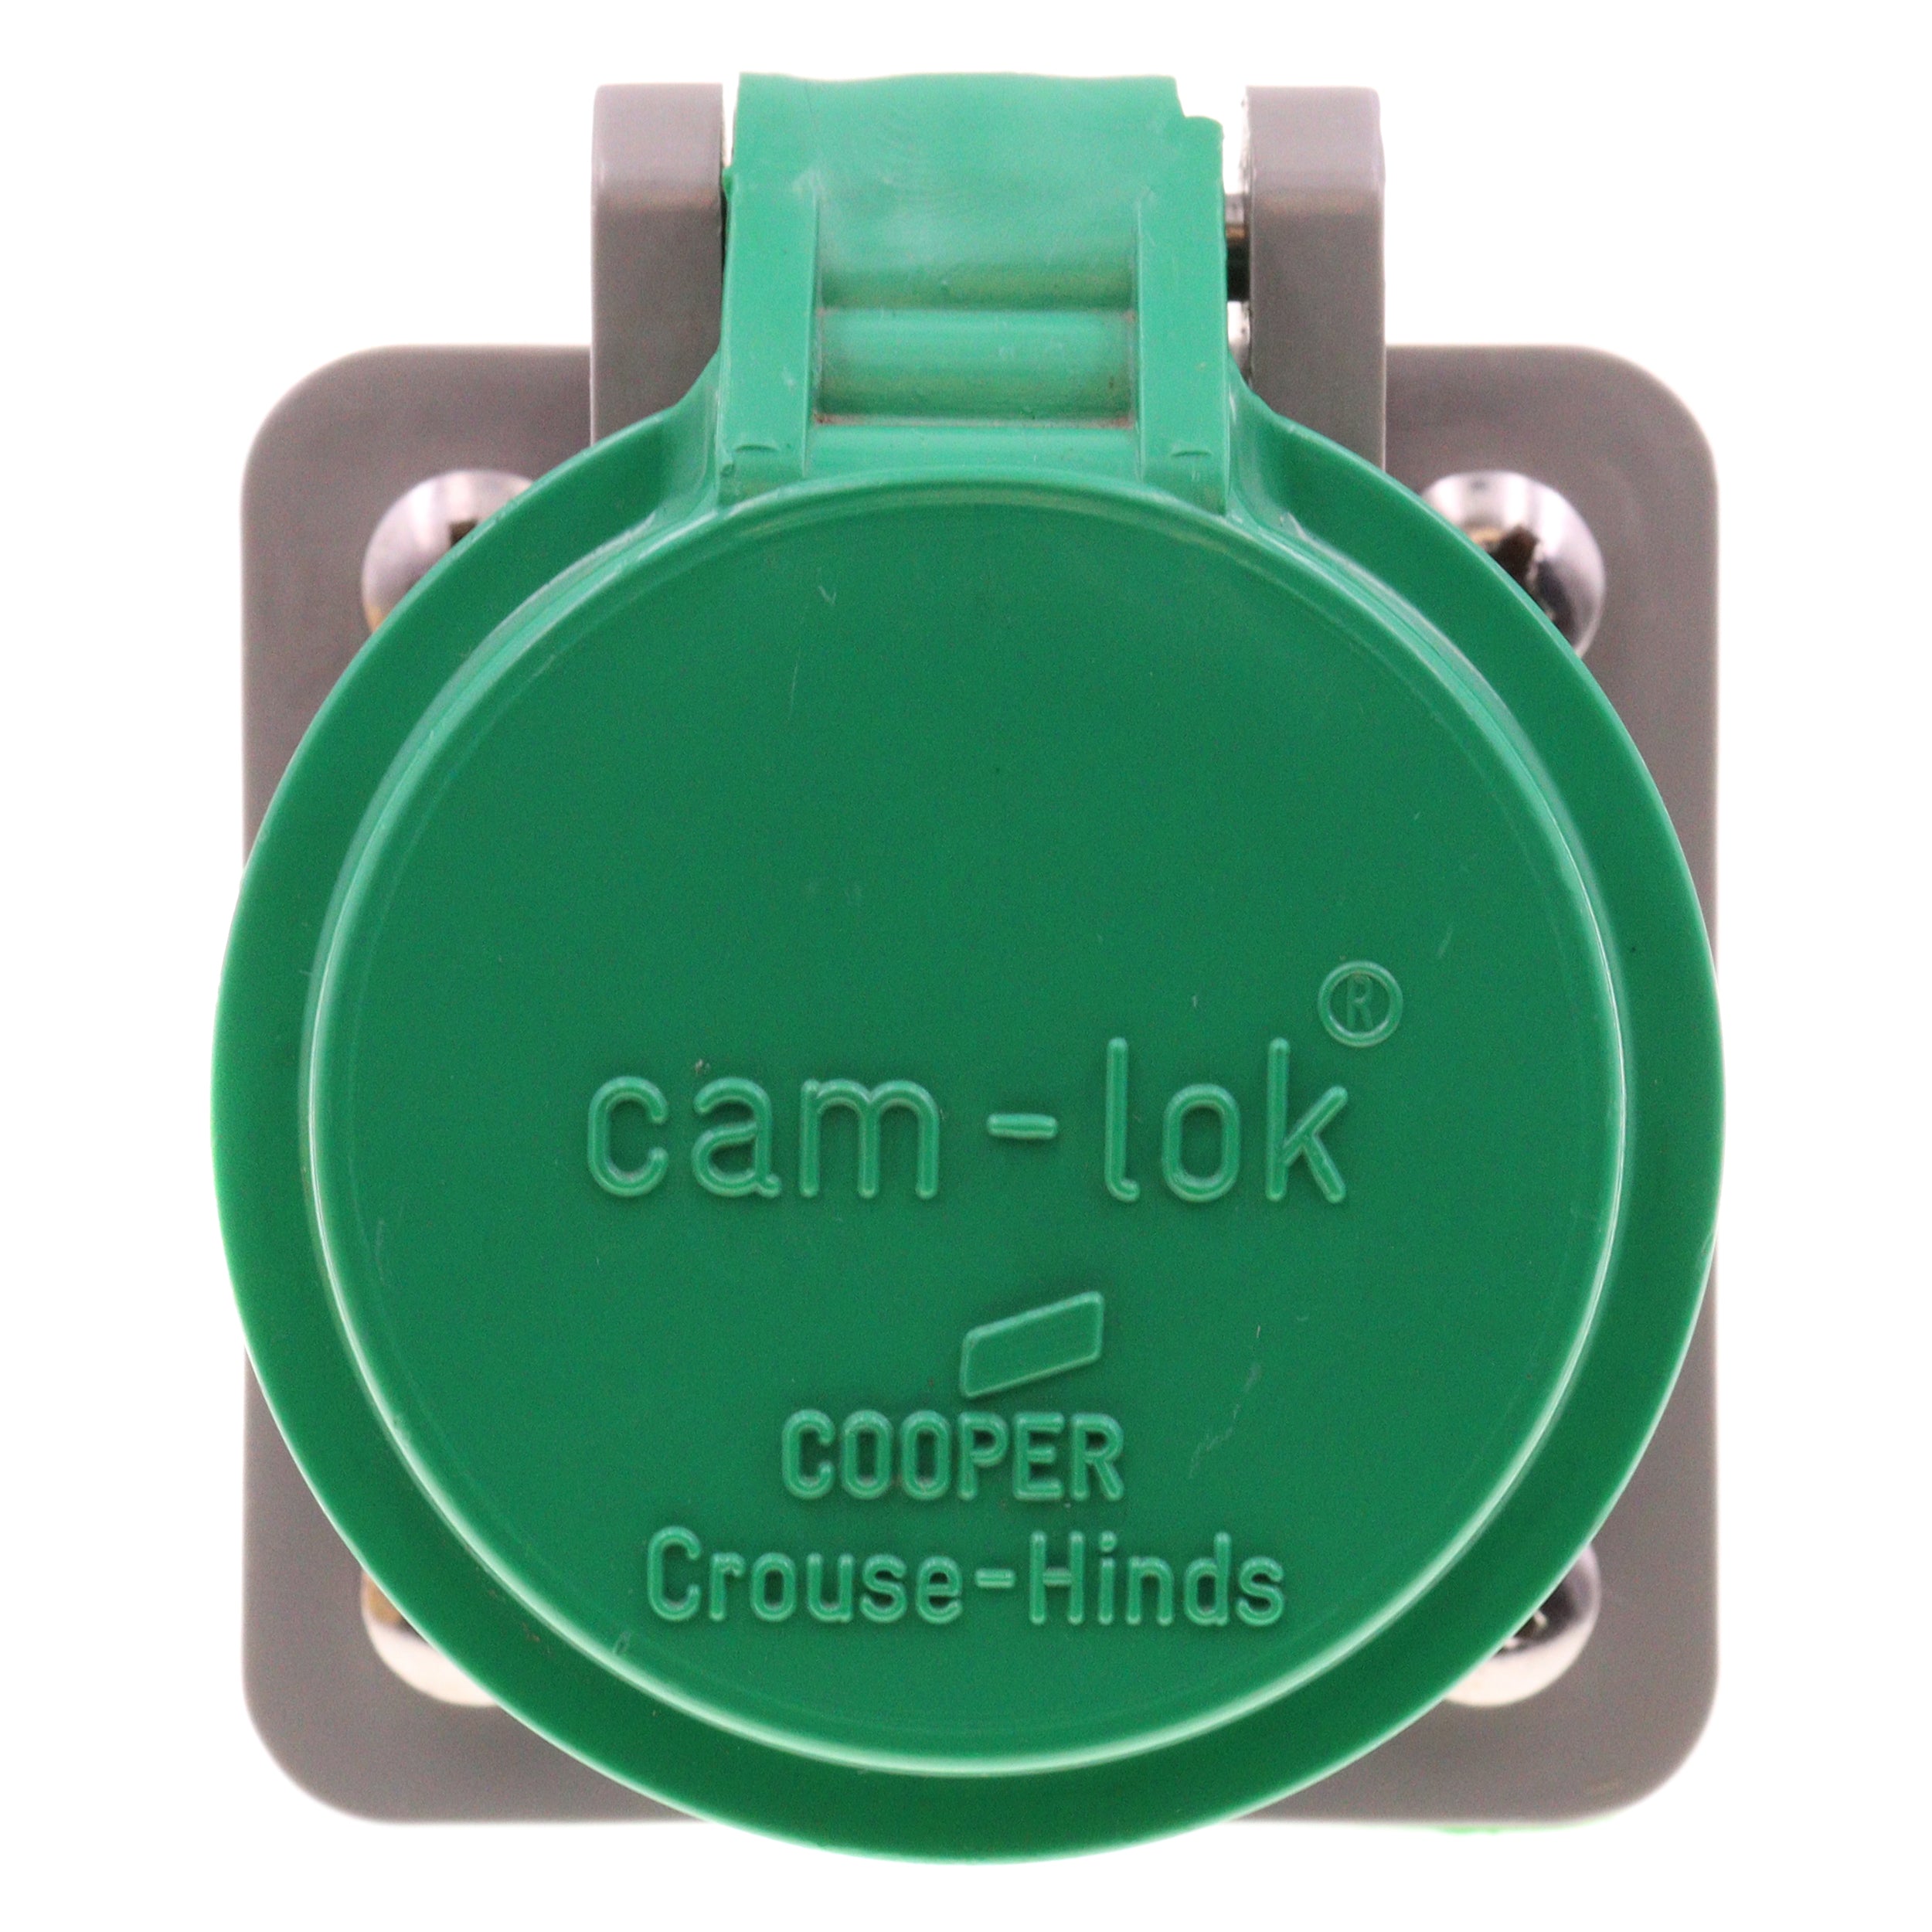 Crouse Hinds, CROUSE-HINDS E1016SC-35 J TYPE CAMLOCK FEMALE RECEPTACLE COVER, GREEN